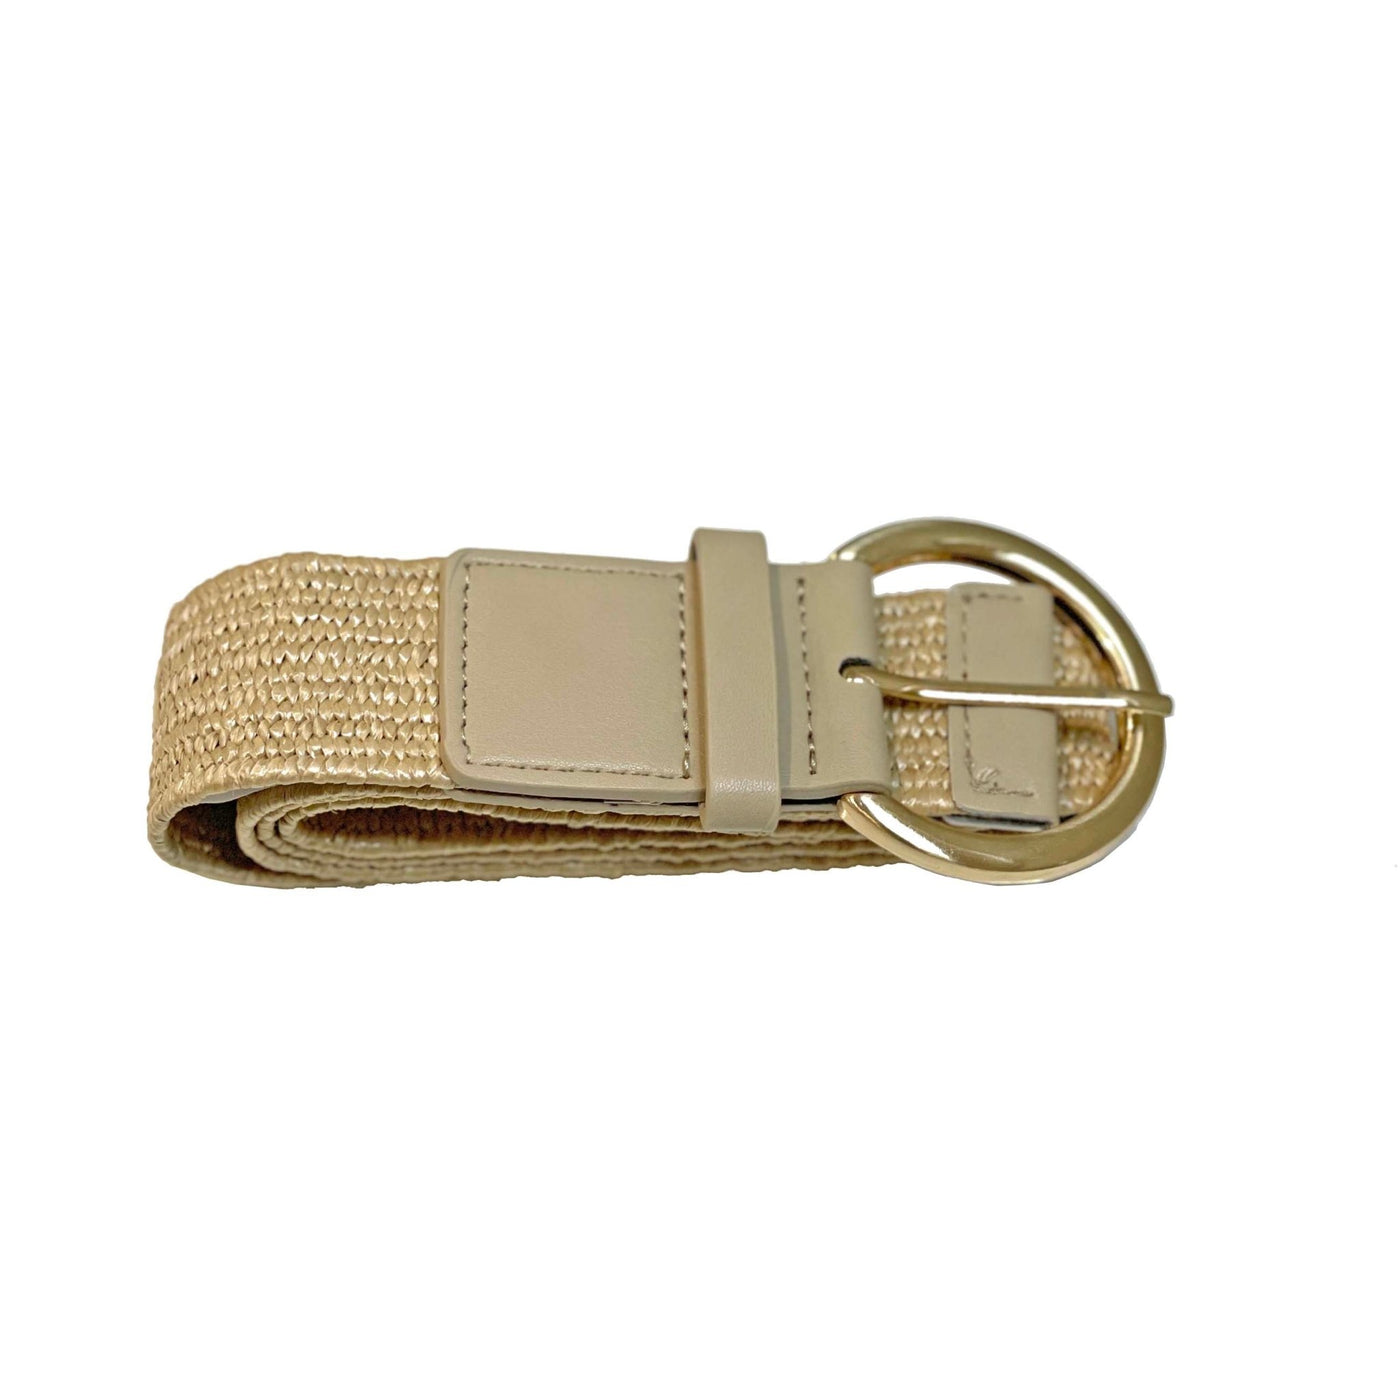 Sass Molly Stretch Belt in Natural with Round Gold Pin Buckle - Hey Sara